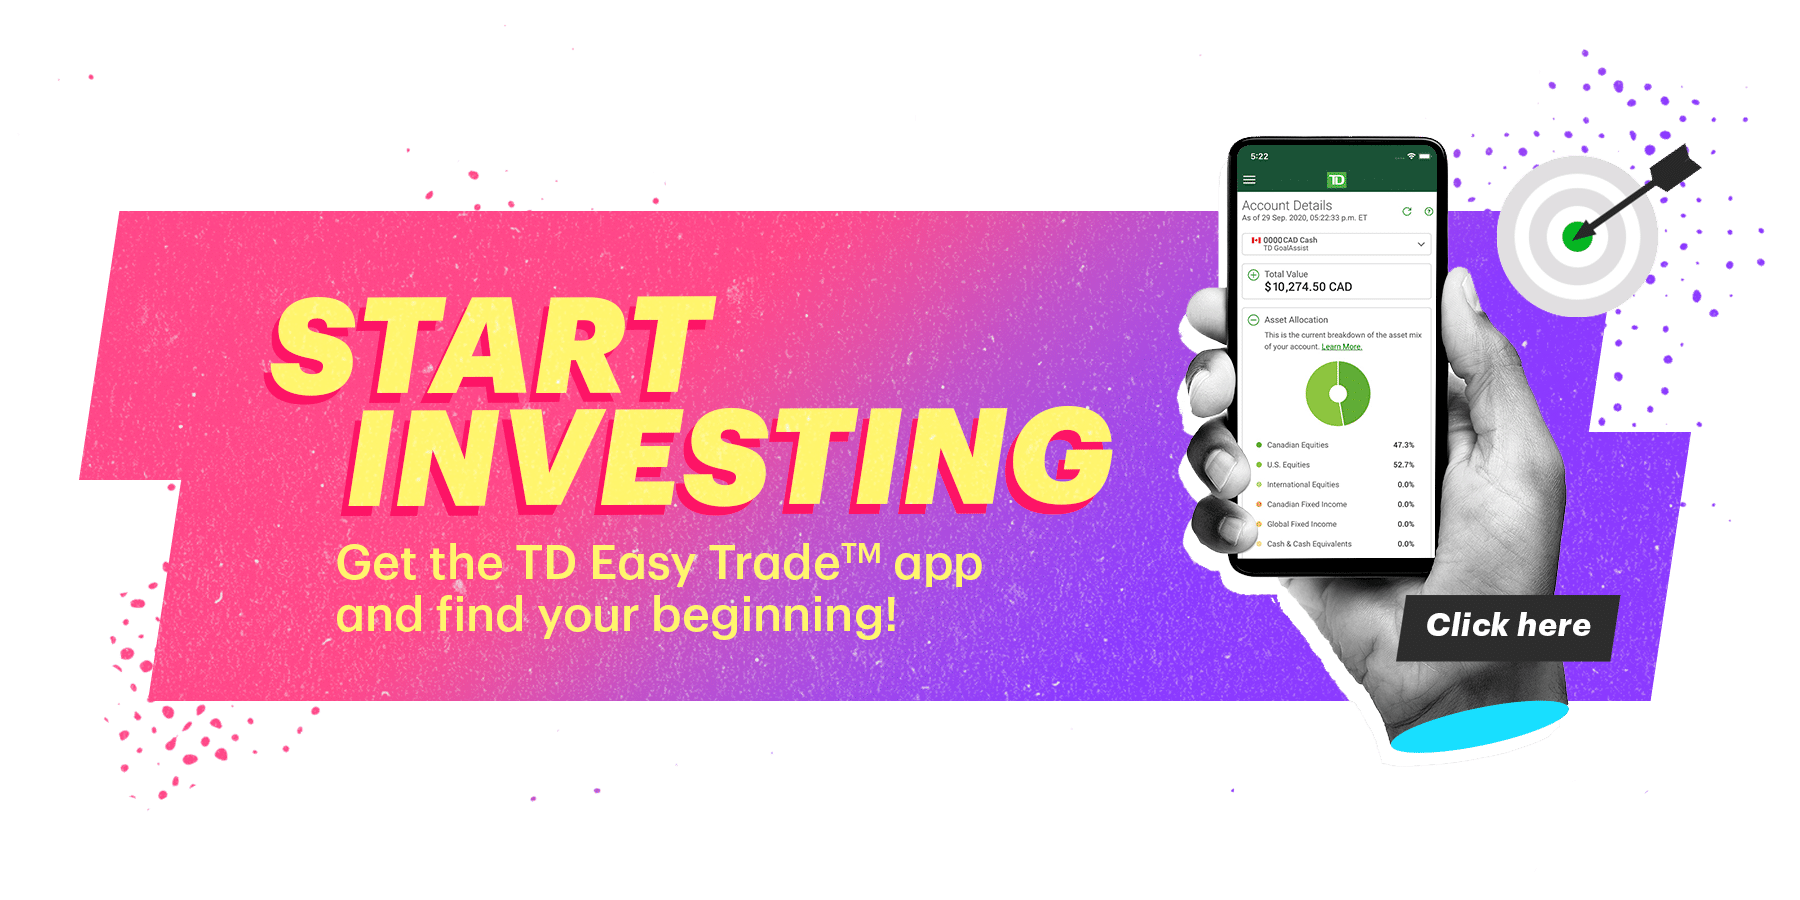 START INVESTING. Get the TD Easy Trade app and find your beginning!